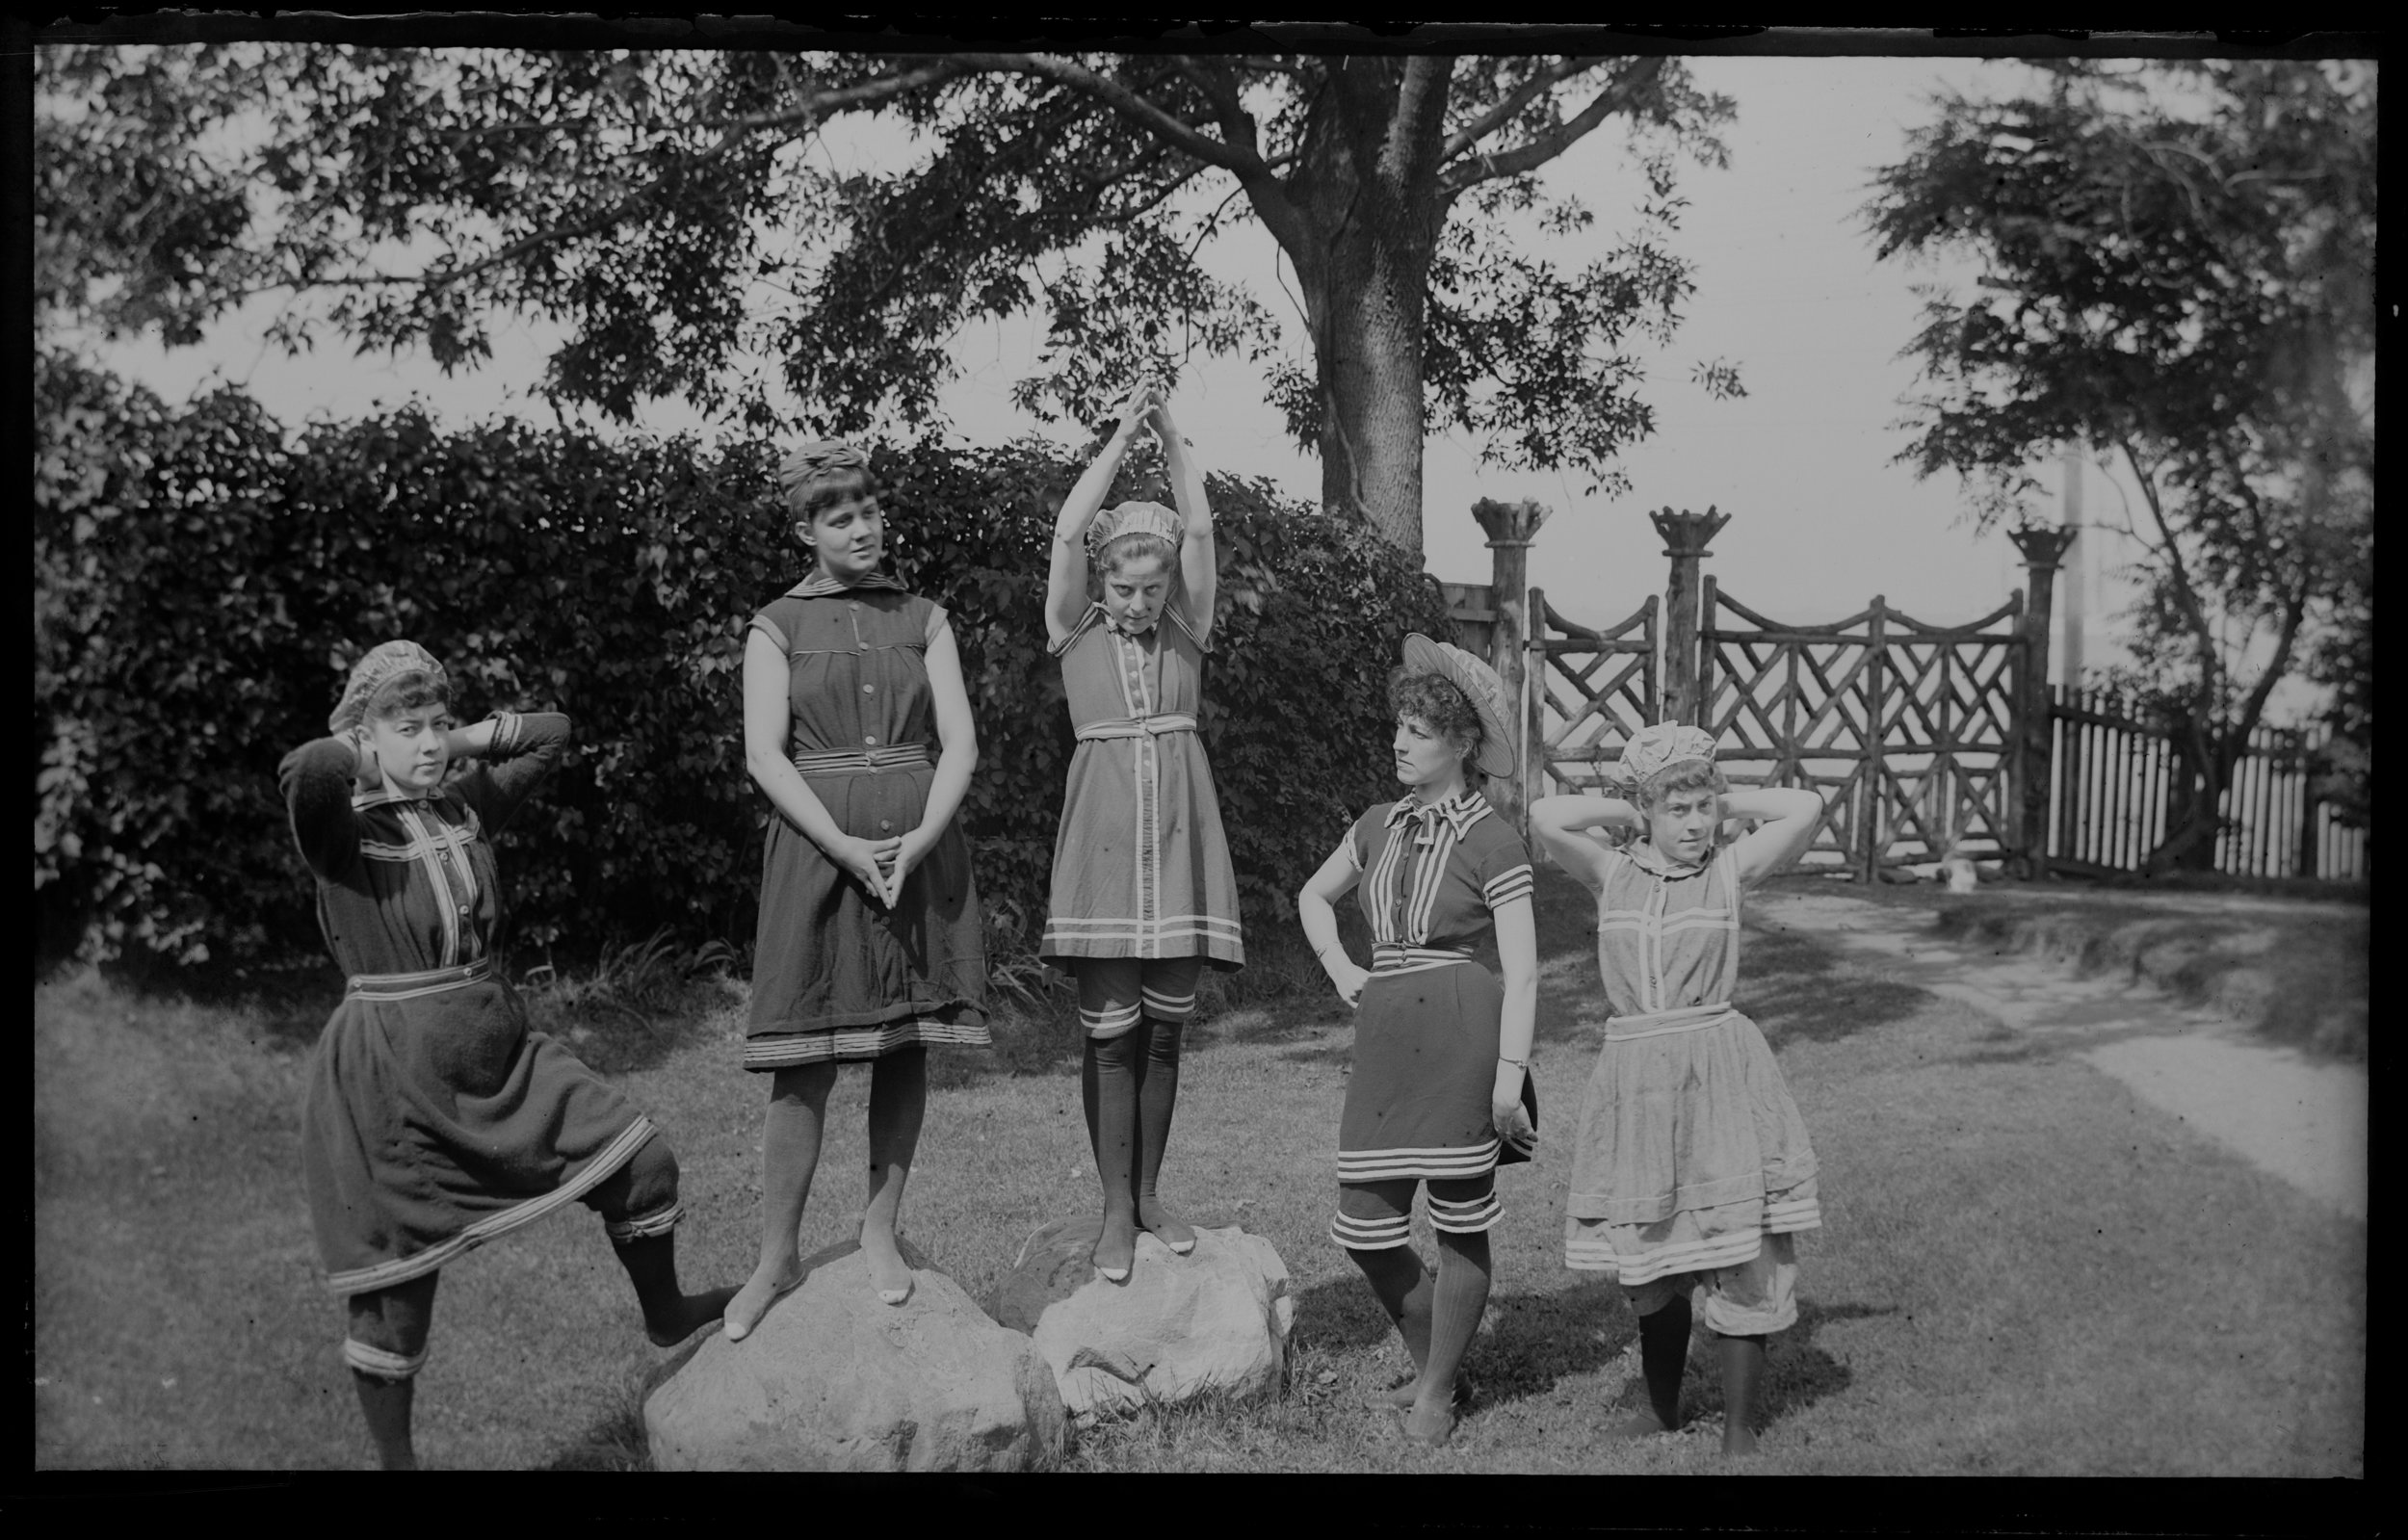 “Group in bathing costumes,” on the lawn at Clear Comfort, September 17, 1885. Alice Austen stands at far left